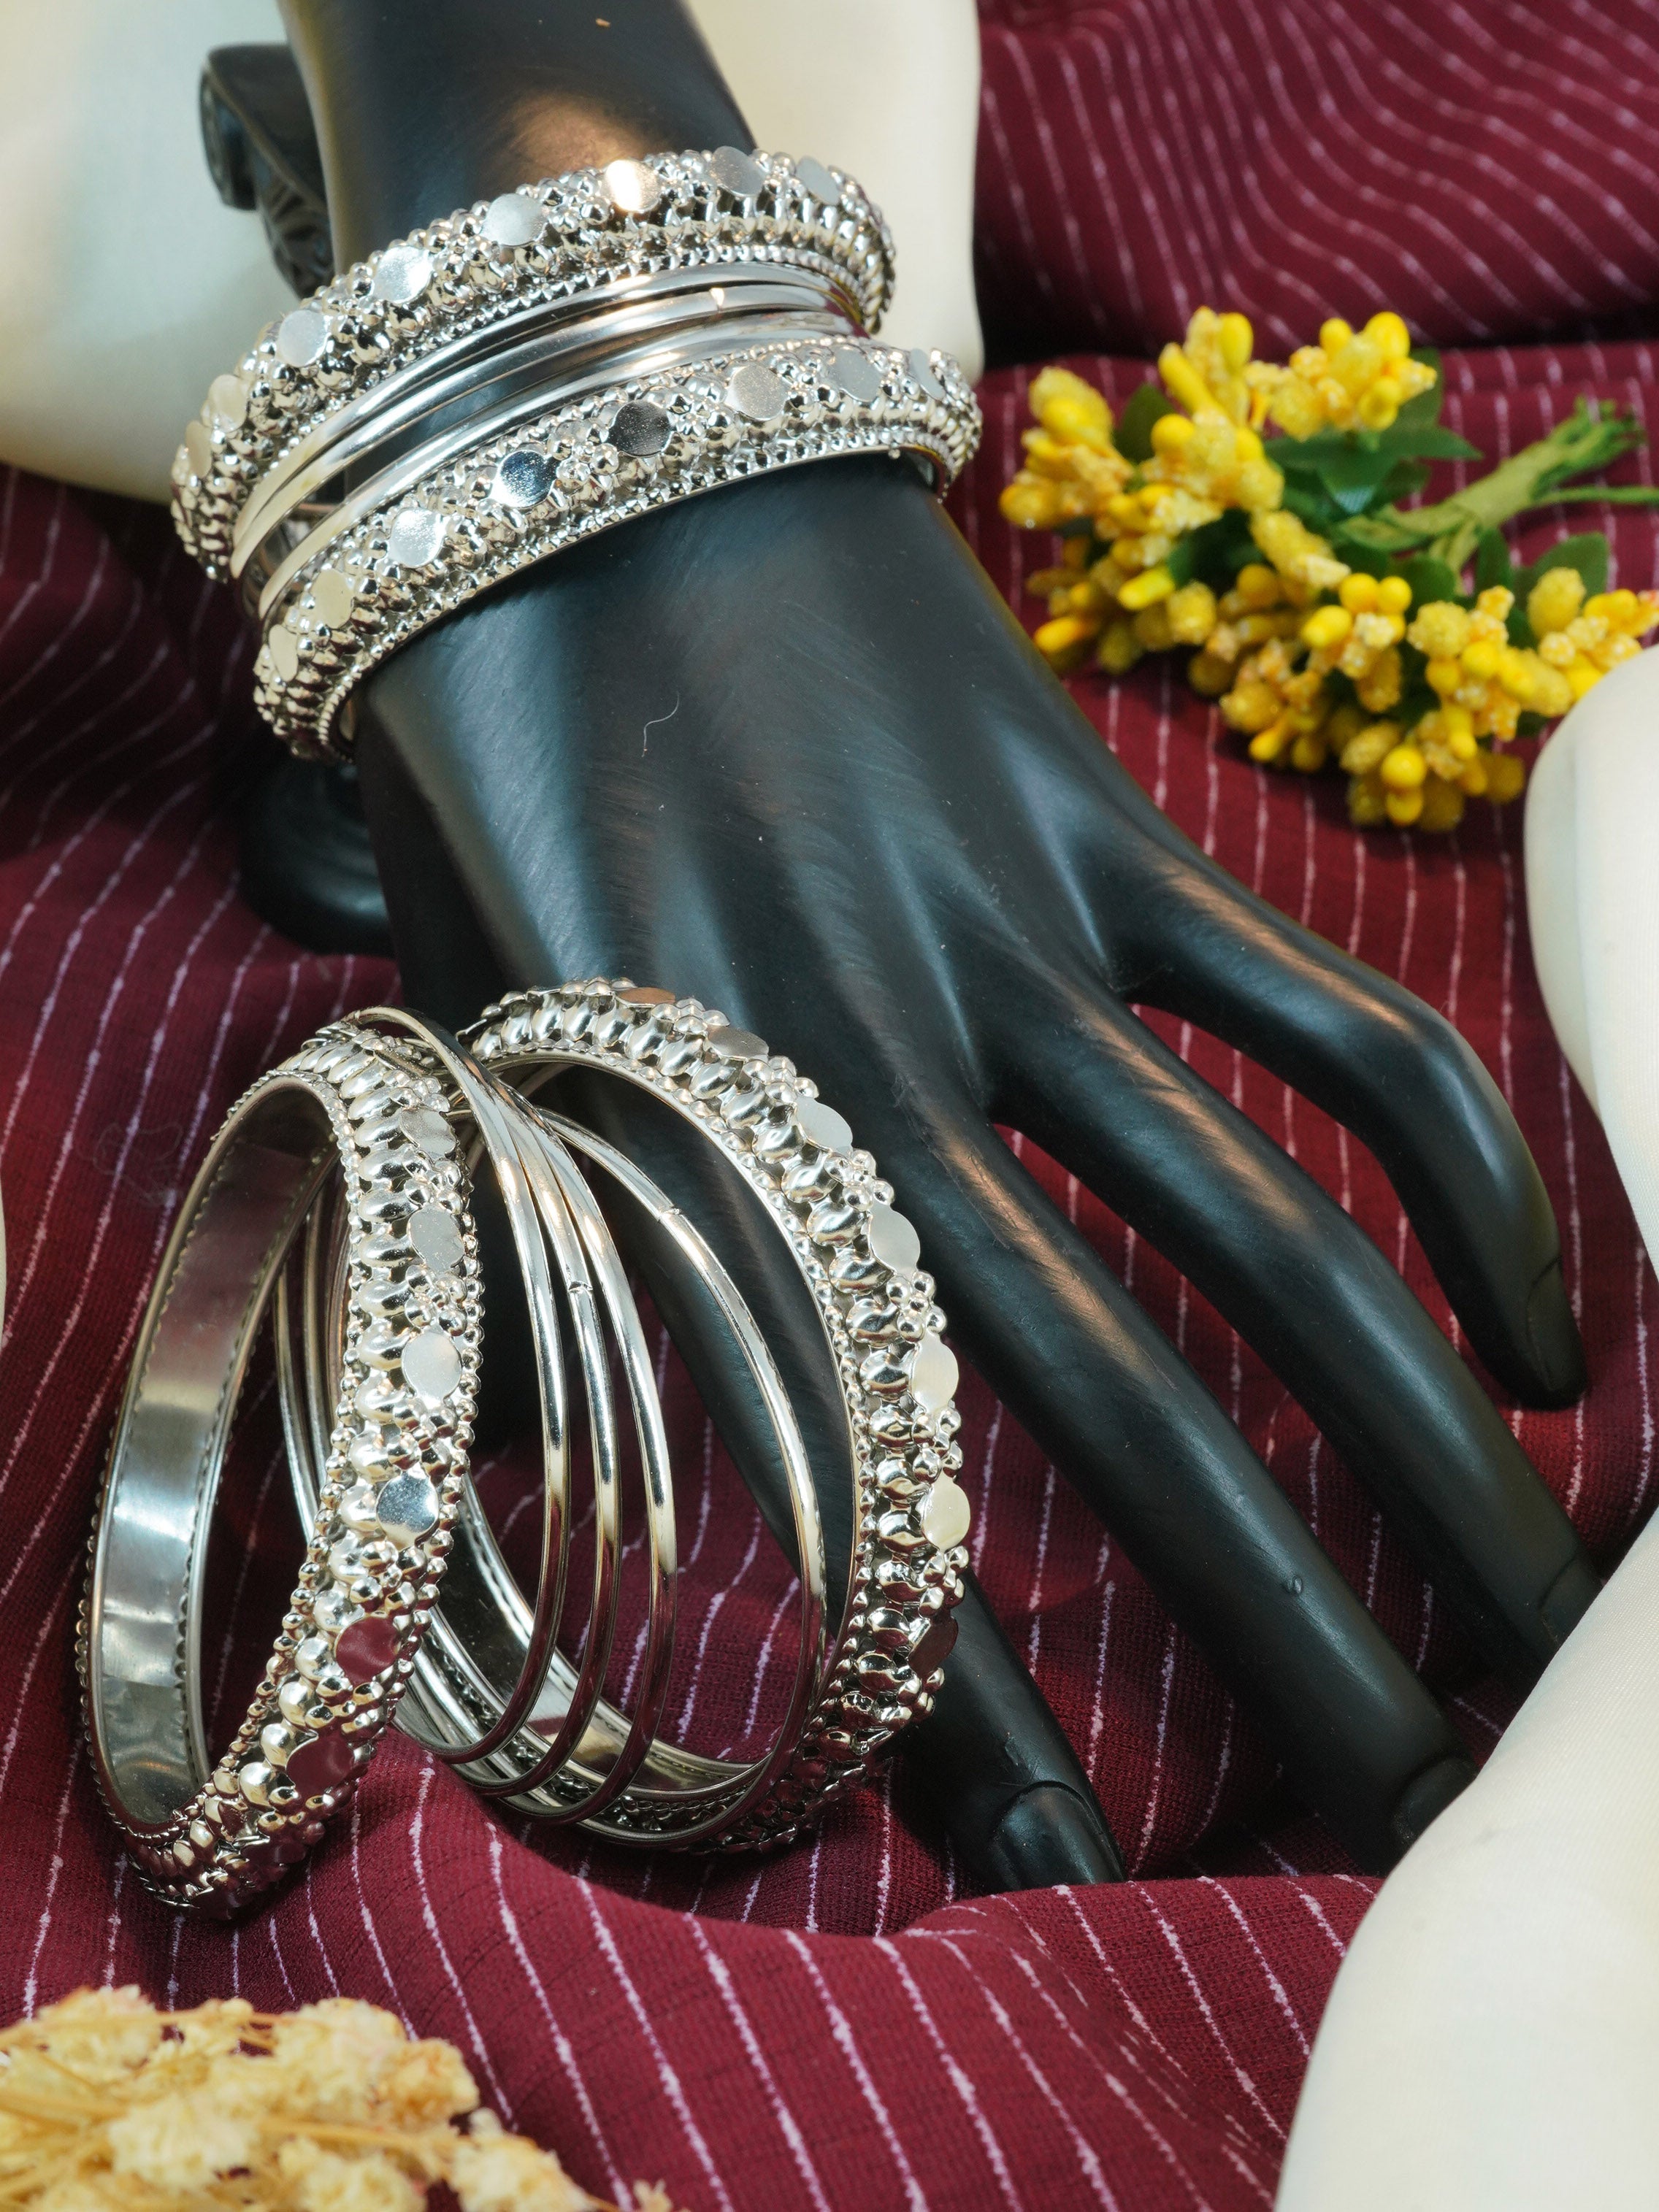 Fancy Silver Plated Bangles Set of 12 bangles 11476K